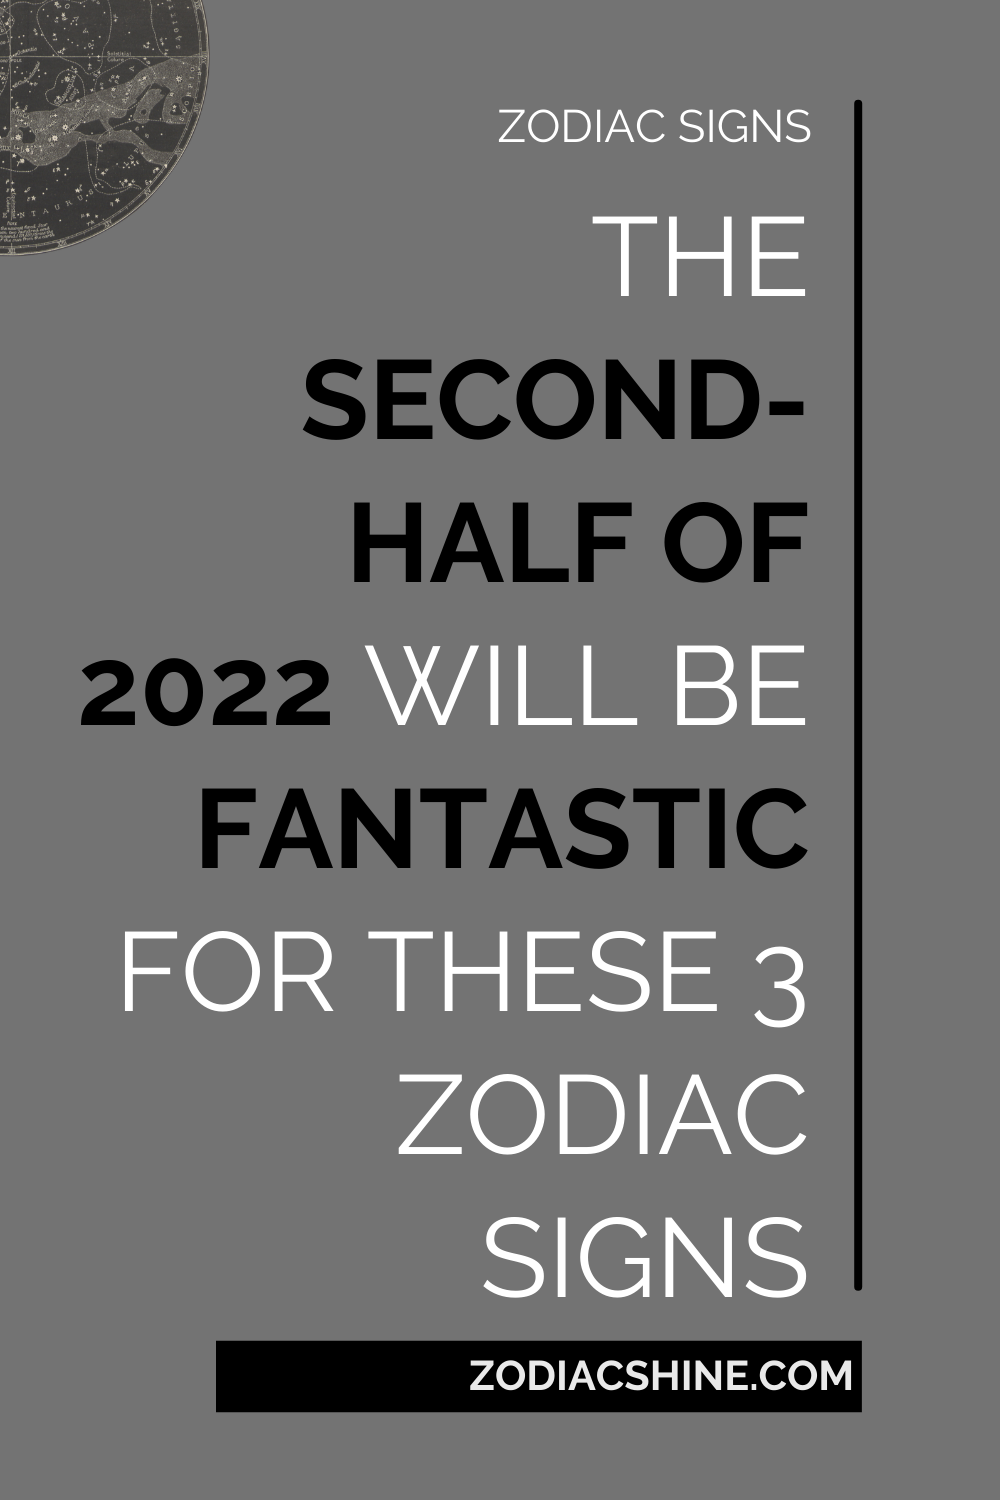 The Second-Half Of 2022 Will Be Fantastic For These 3 Zodiac Signs